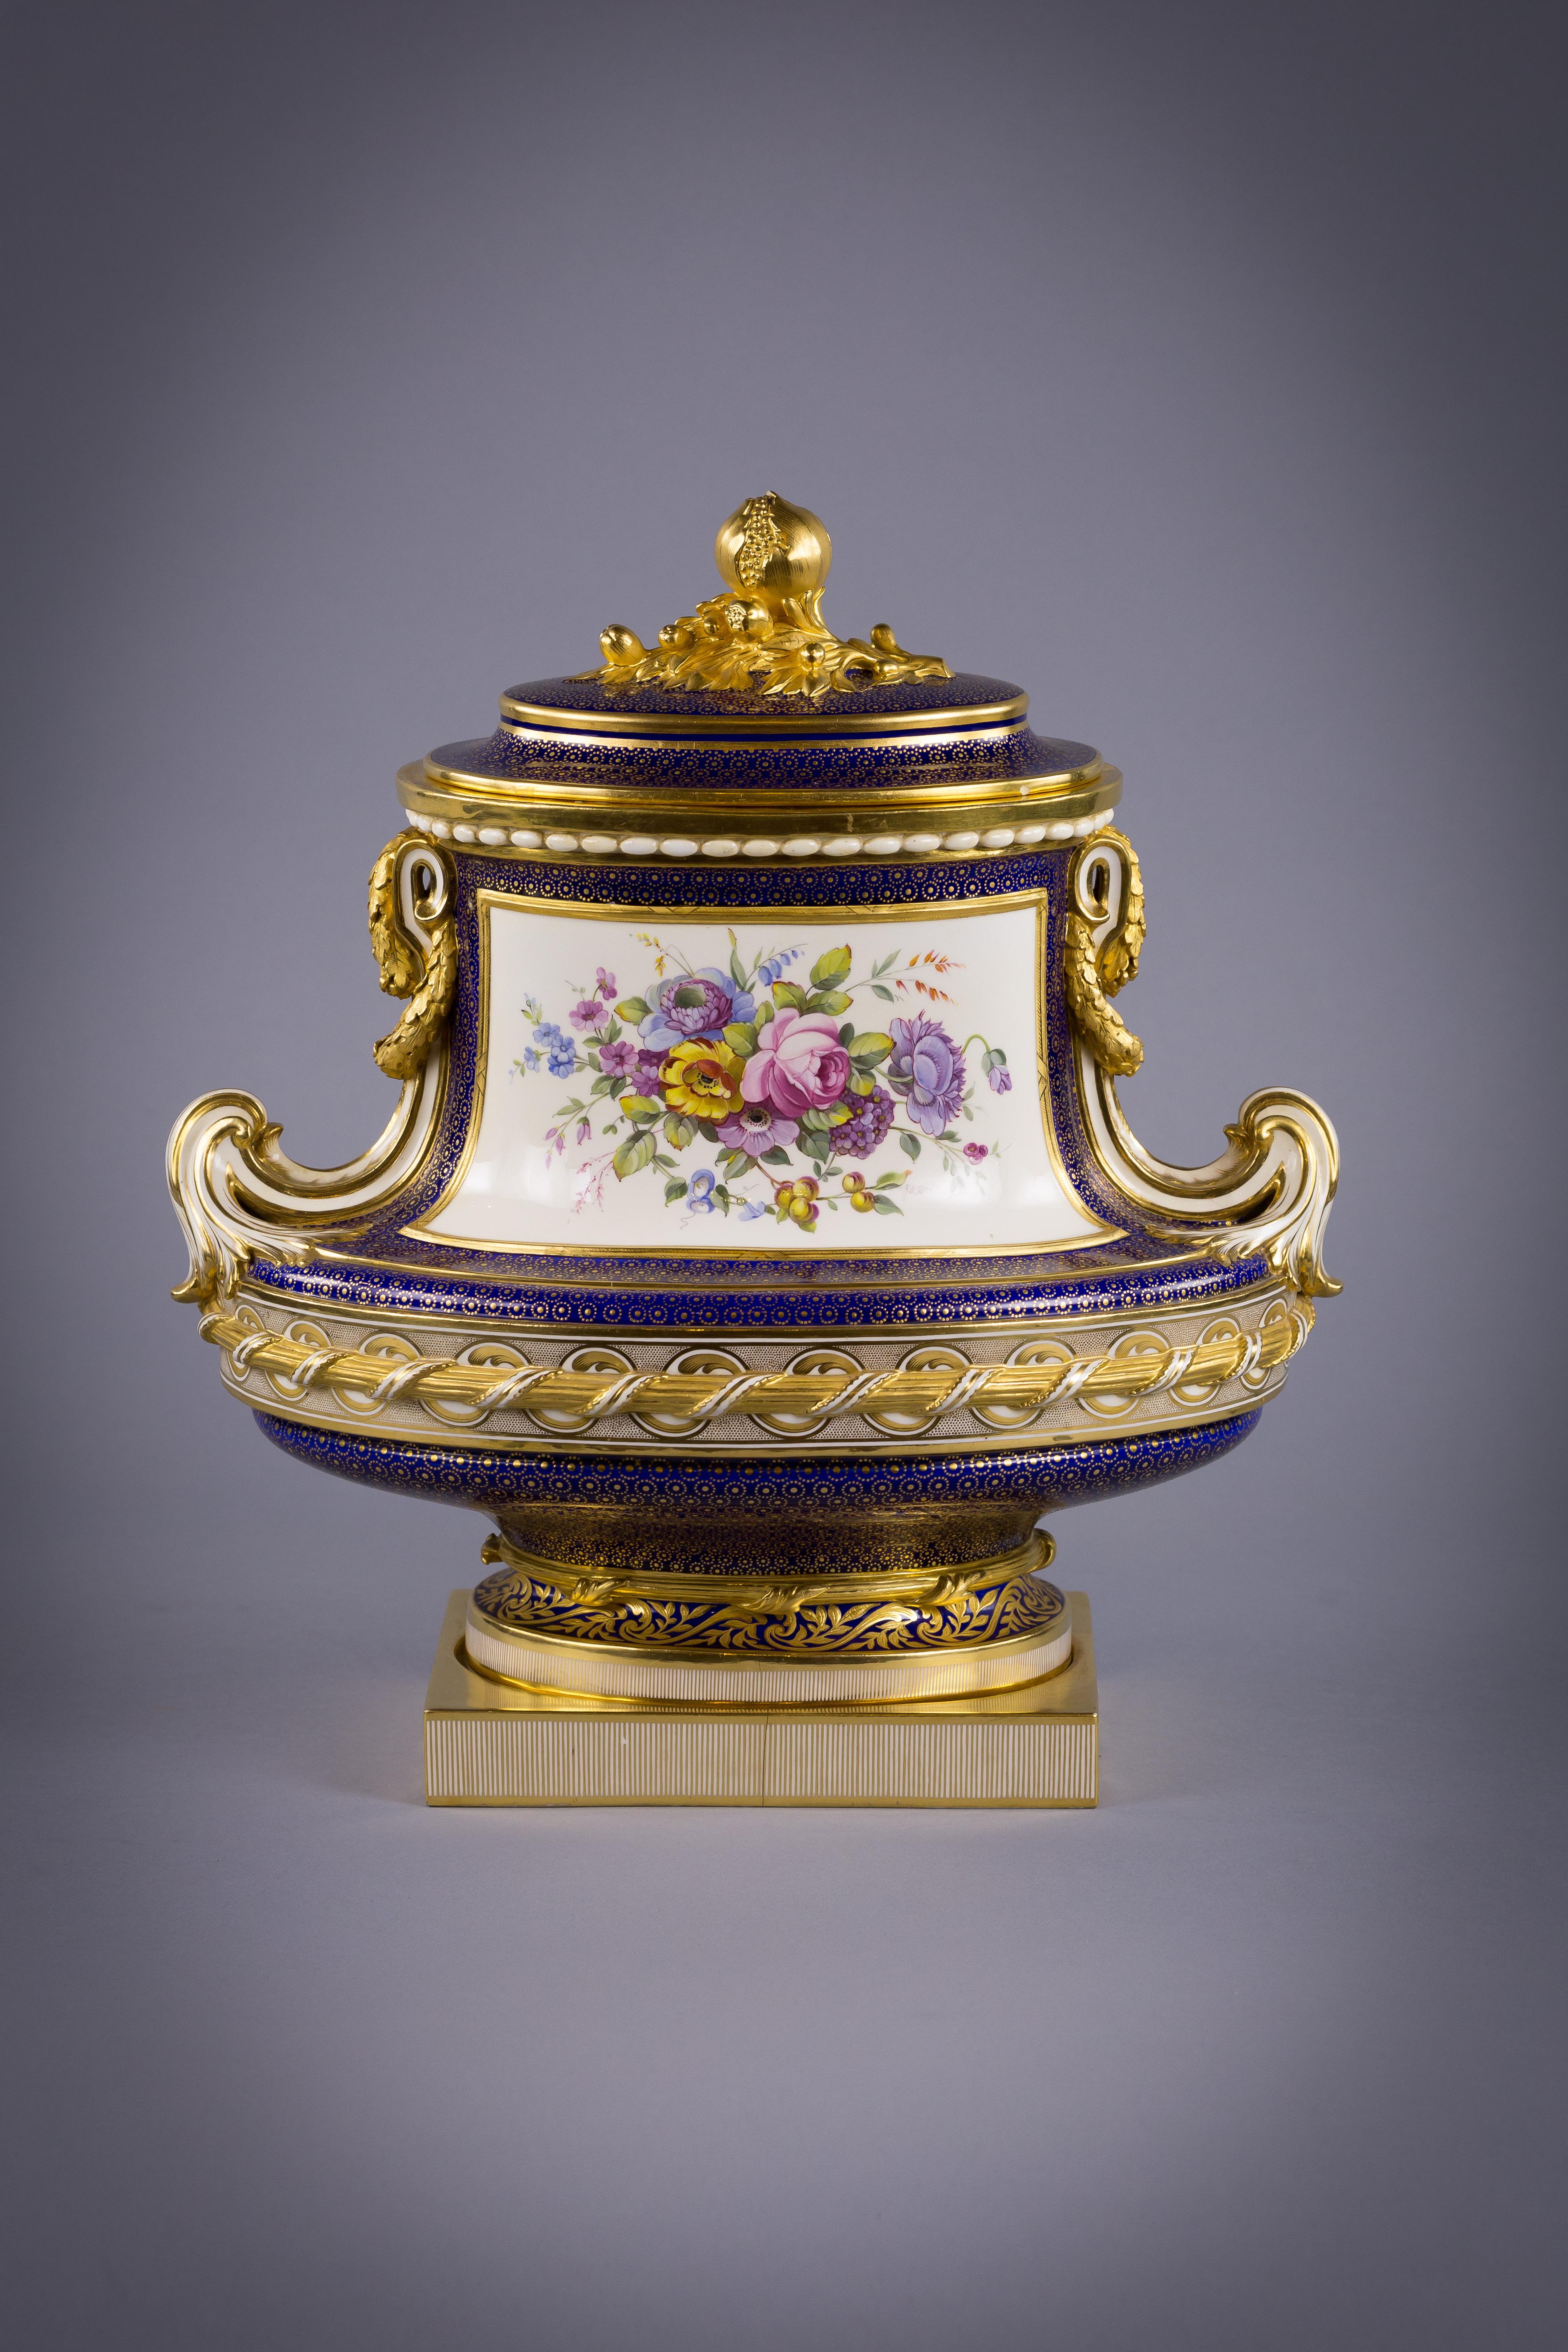 In Sevres style (see photo of base). The floral painting signed 'H.A. Steele' (?).